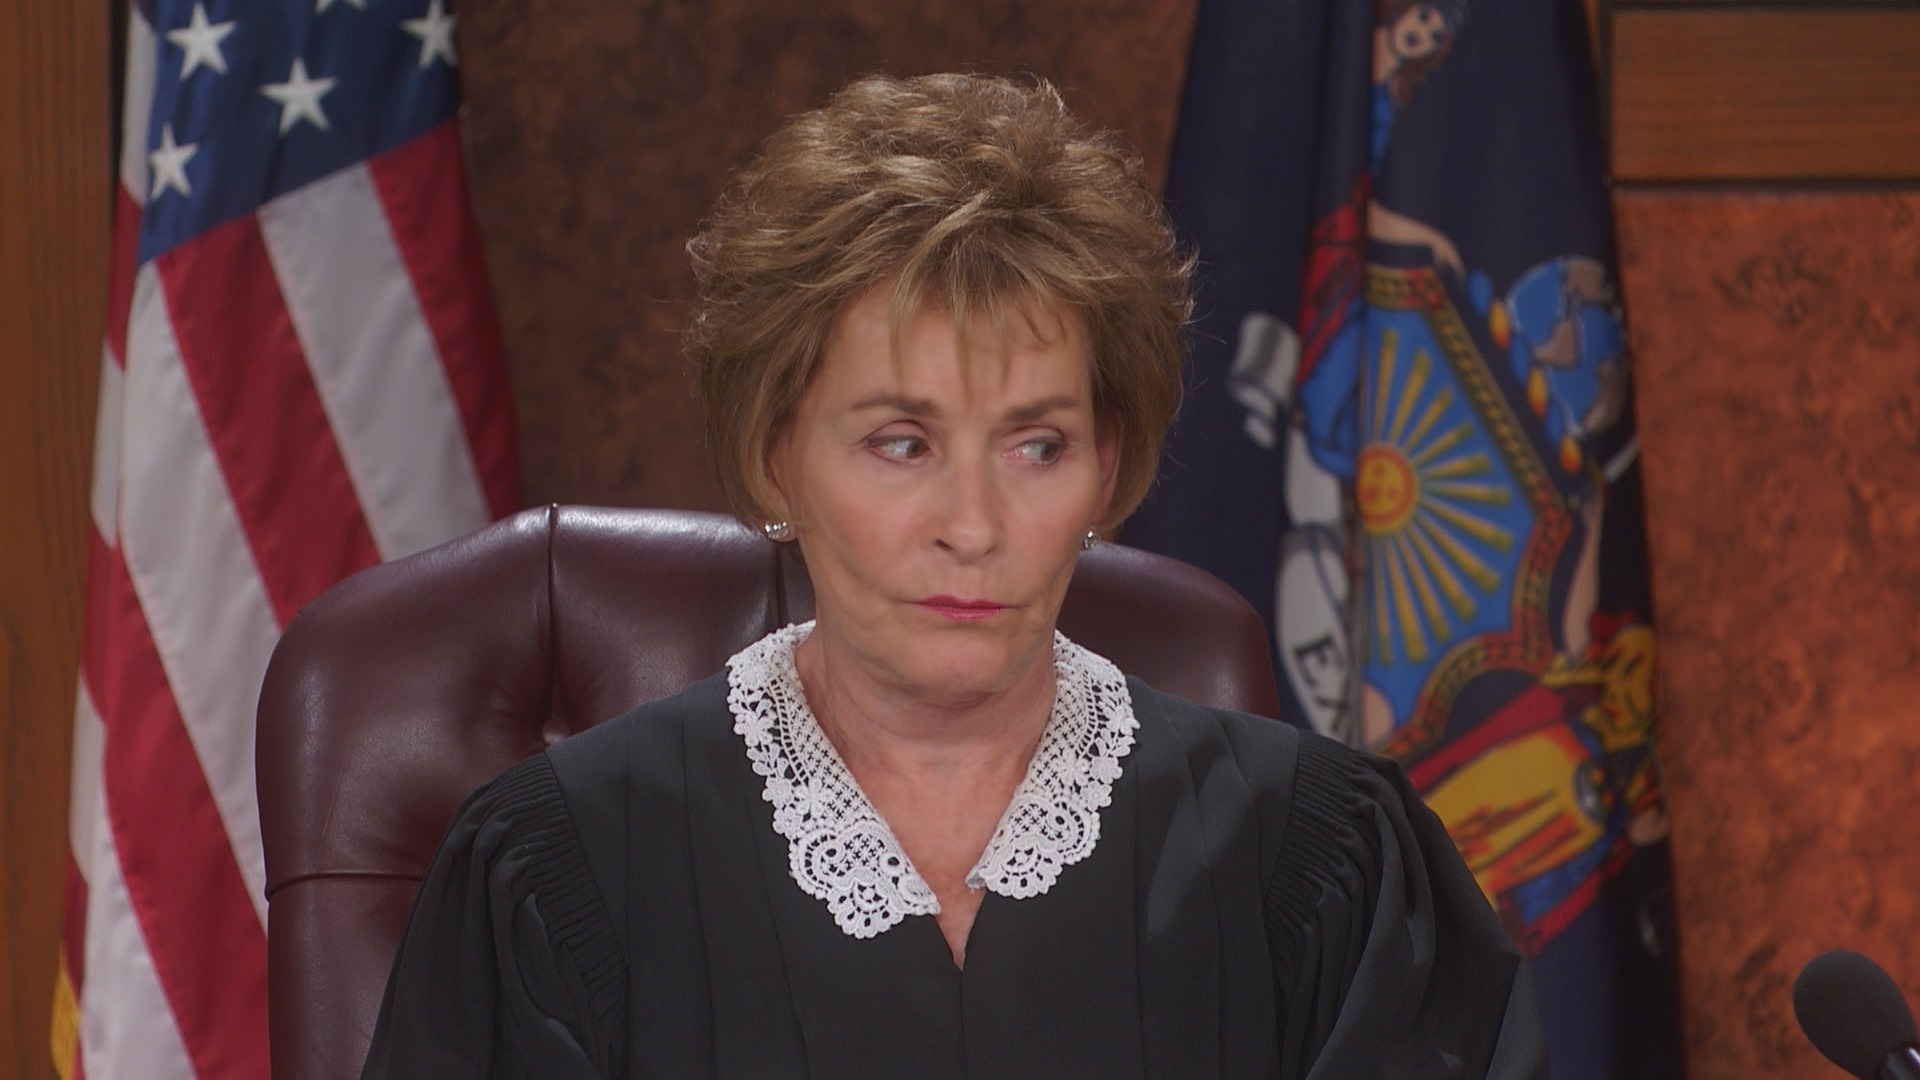 Judge Judy' will end next year after 25 years.